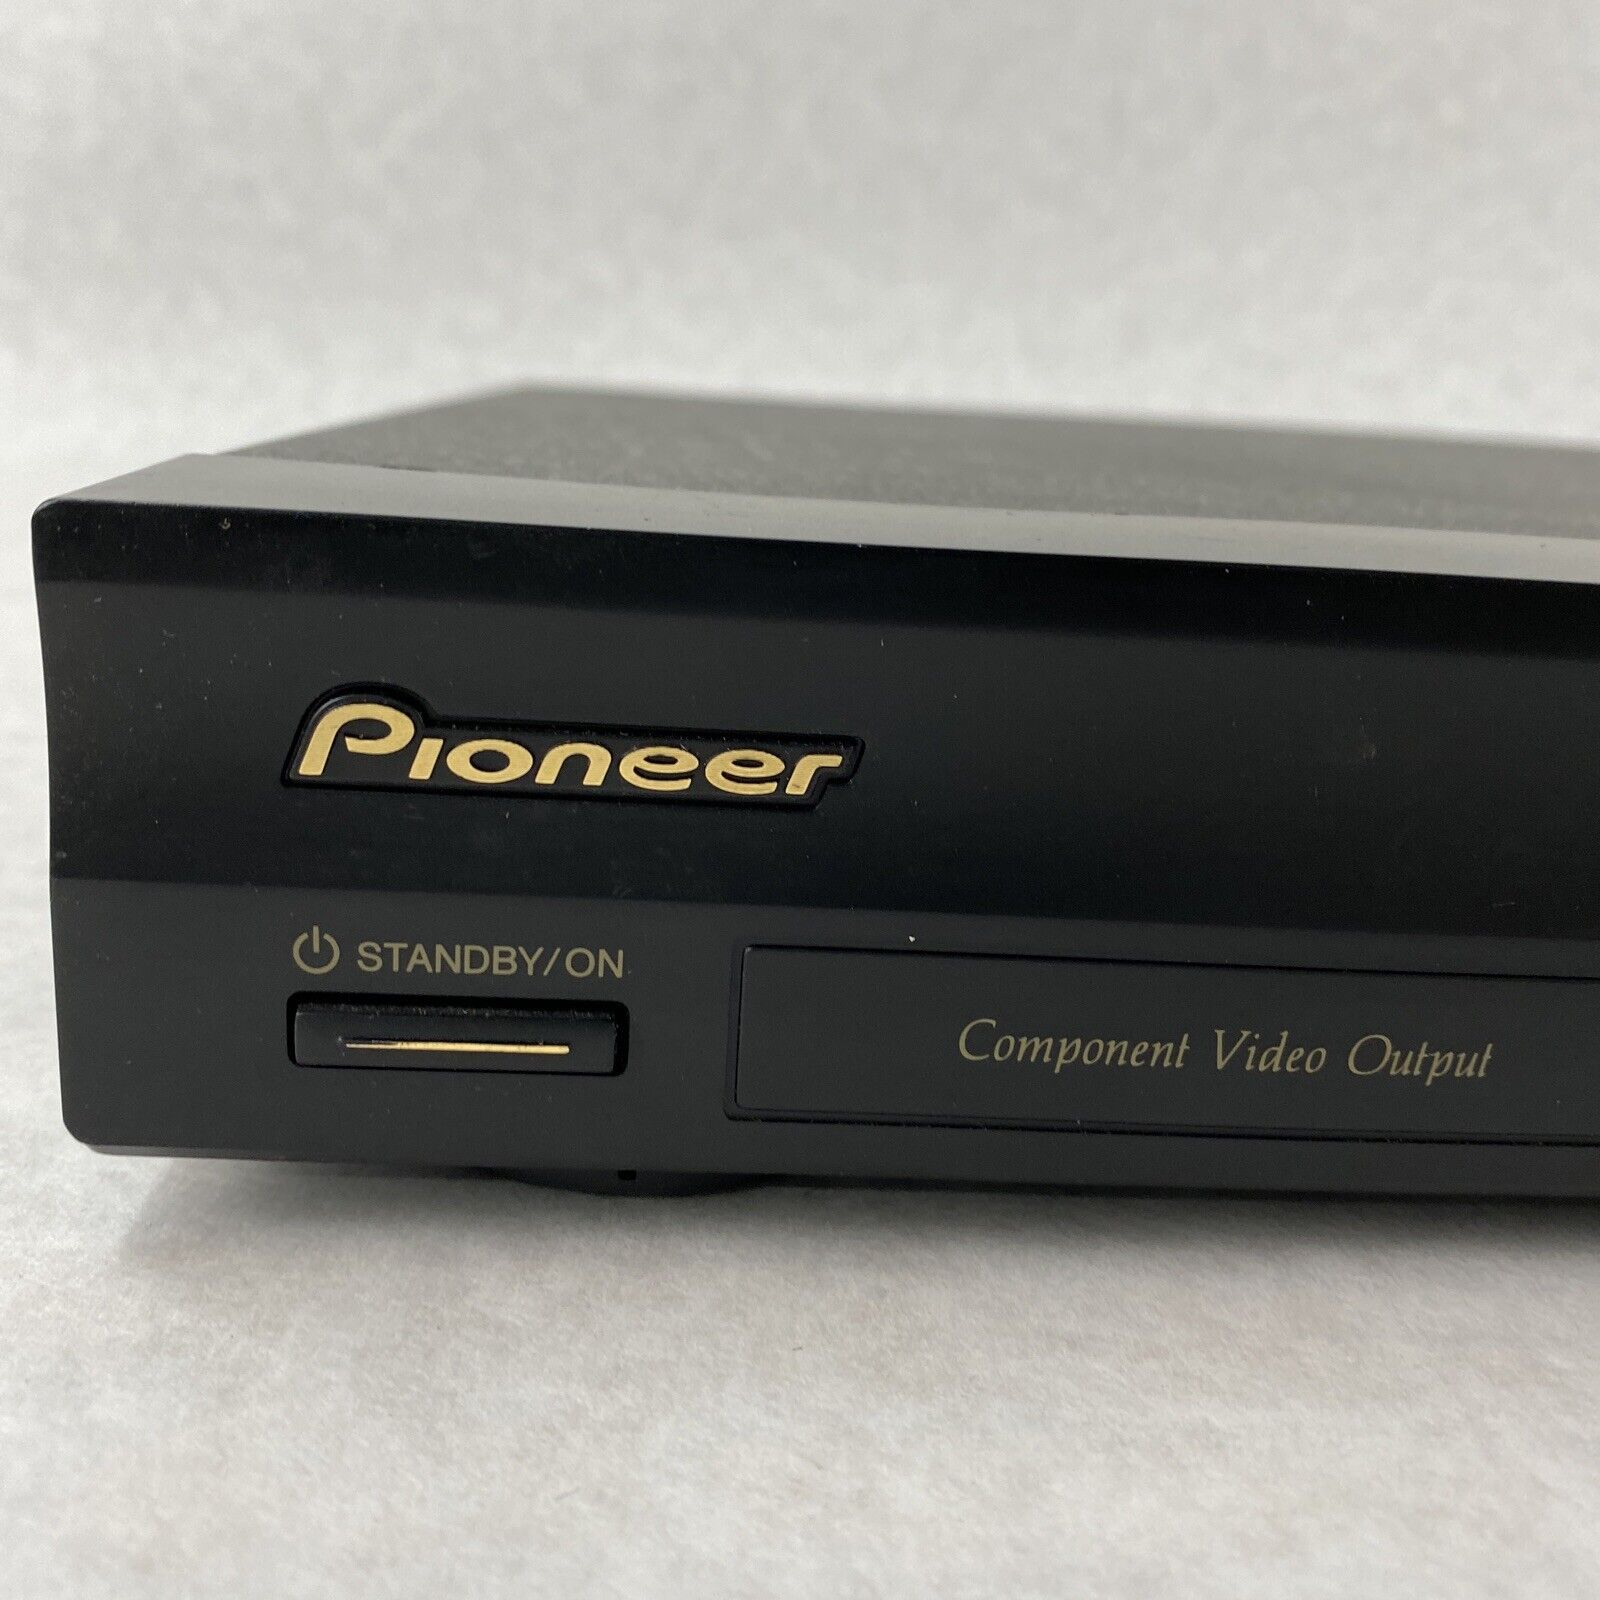 EUC Pioneer DV-440 DVD Player No Remote Tested WORKS